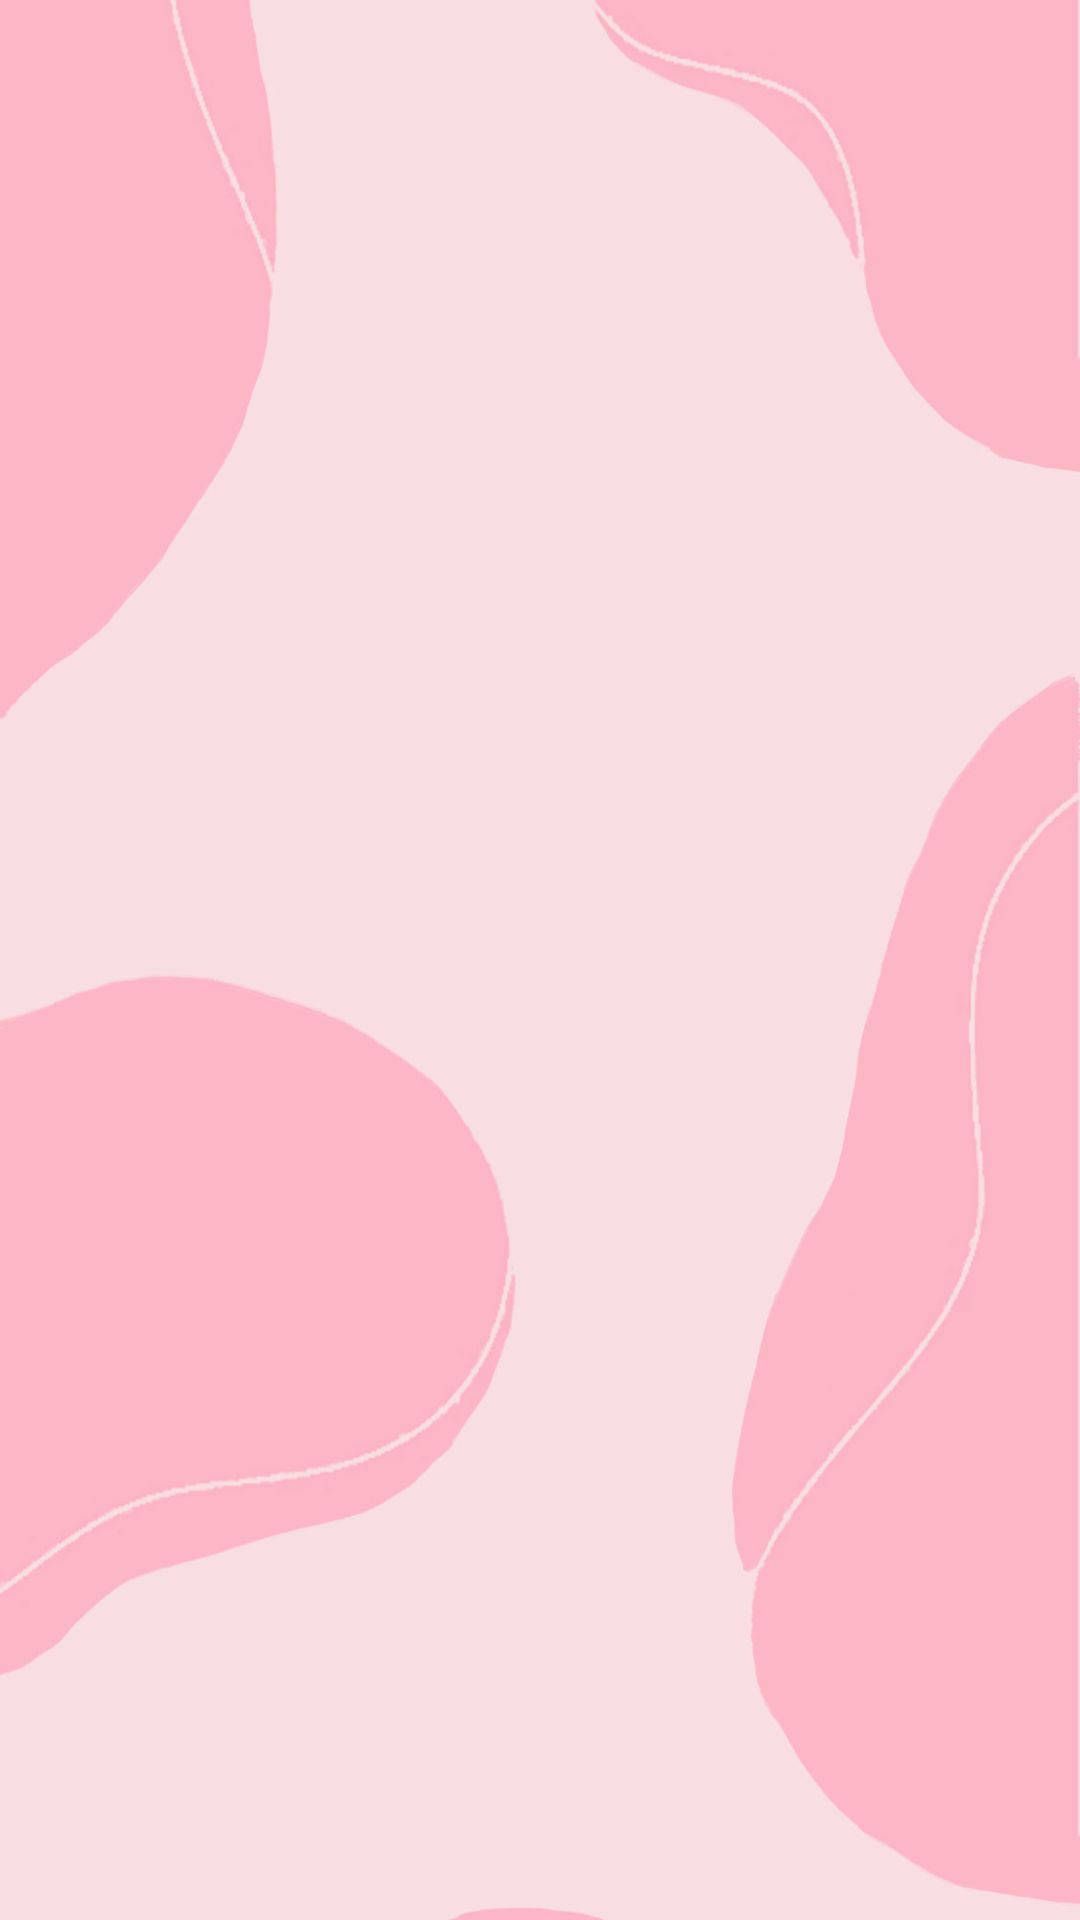 Aesthetic Pink Abstract Wallpaper - Abstract